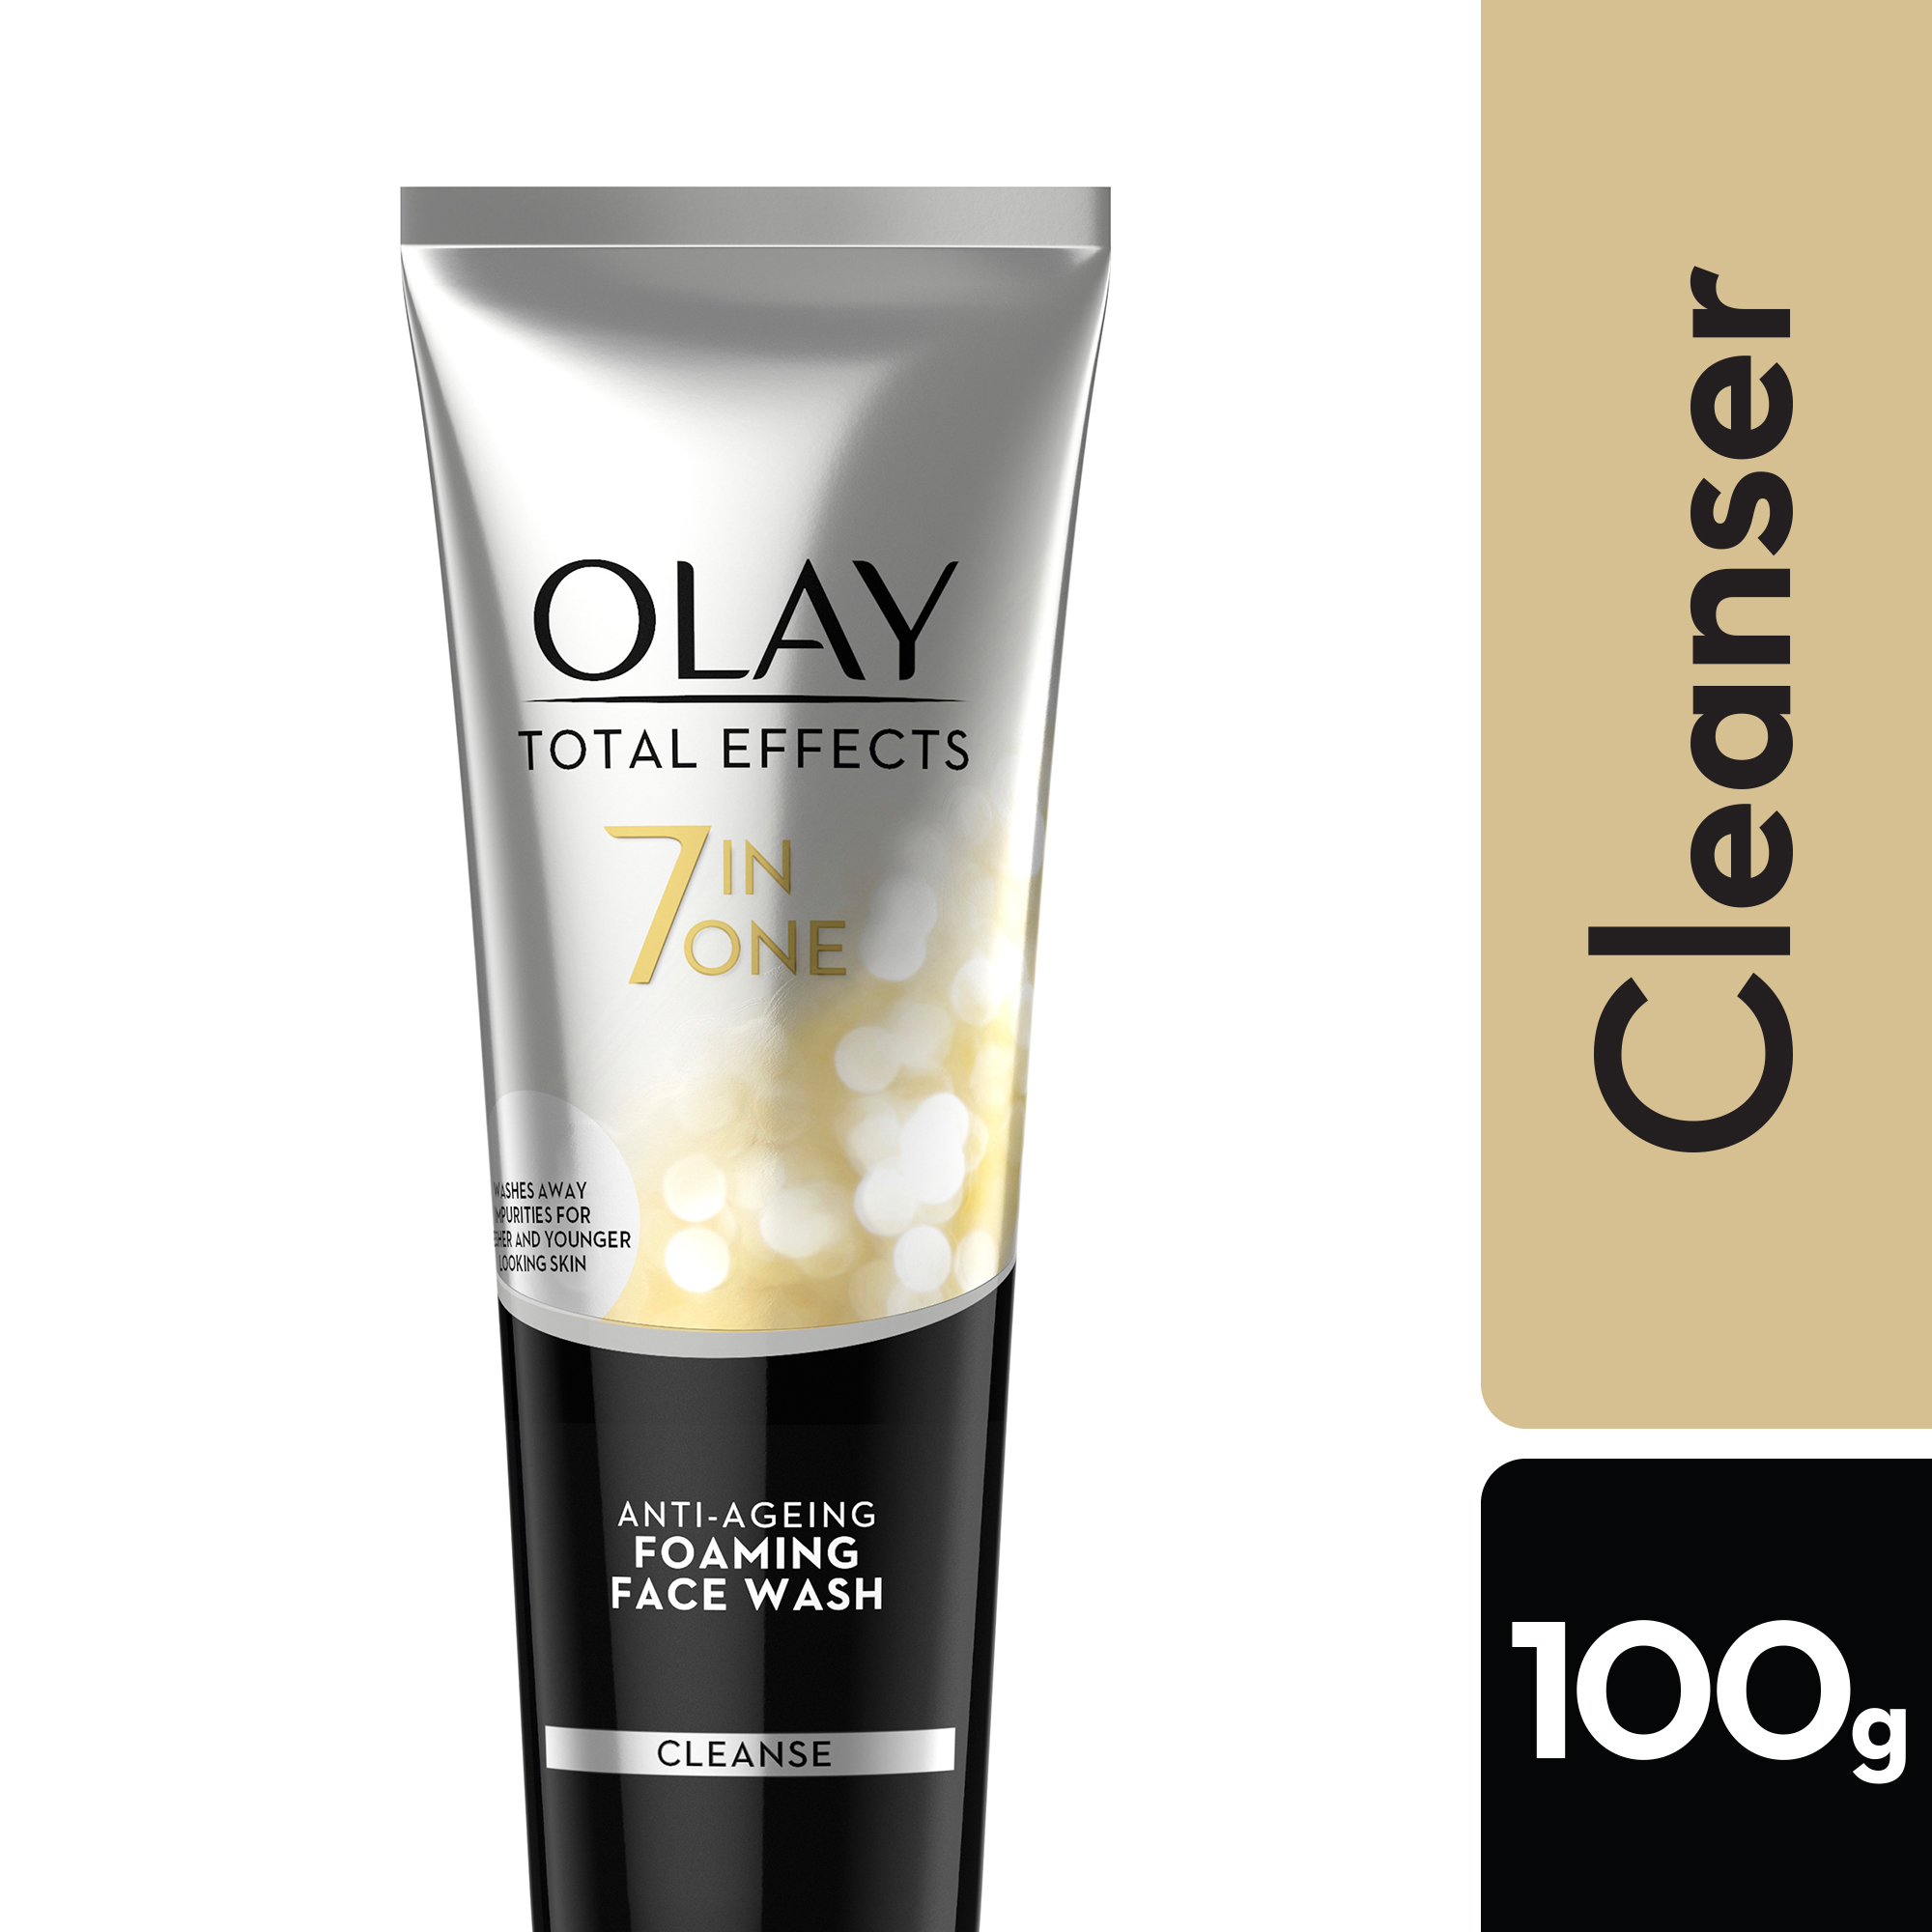 Olay Total Effects 7 in One Anti-Ageing Day Cream Regimen Anniversary Gift Pack